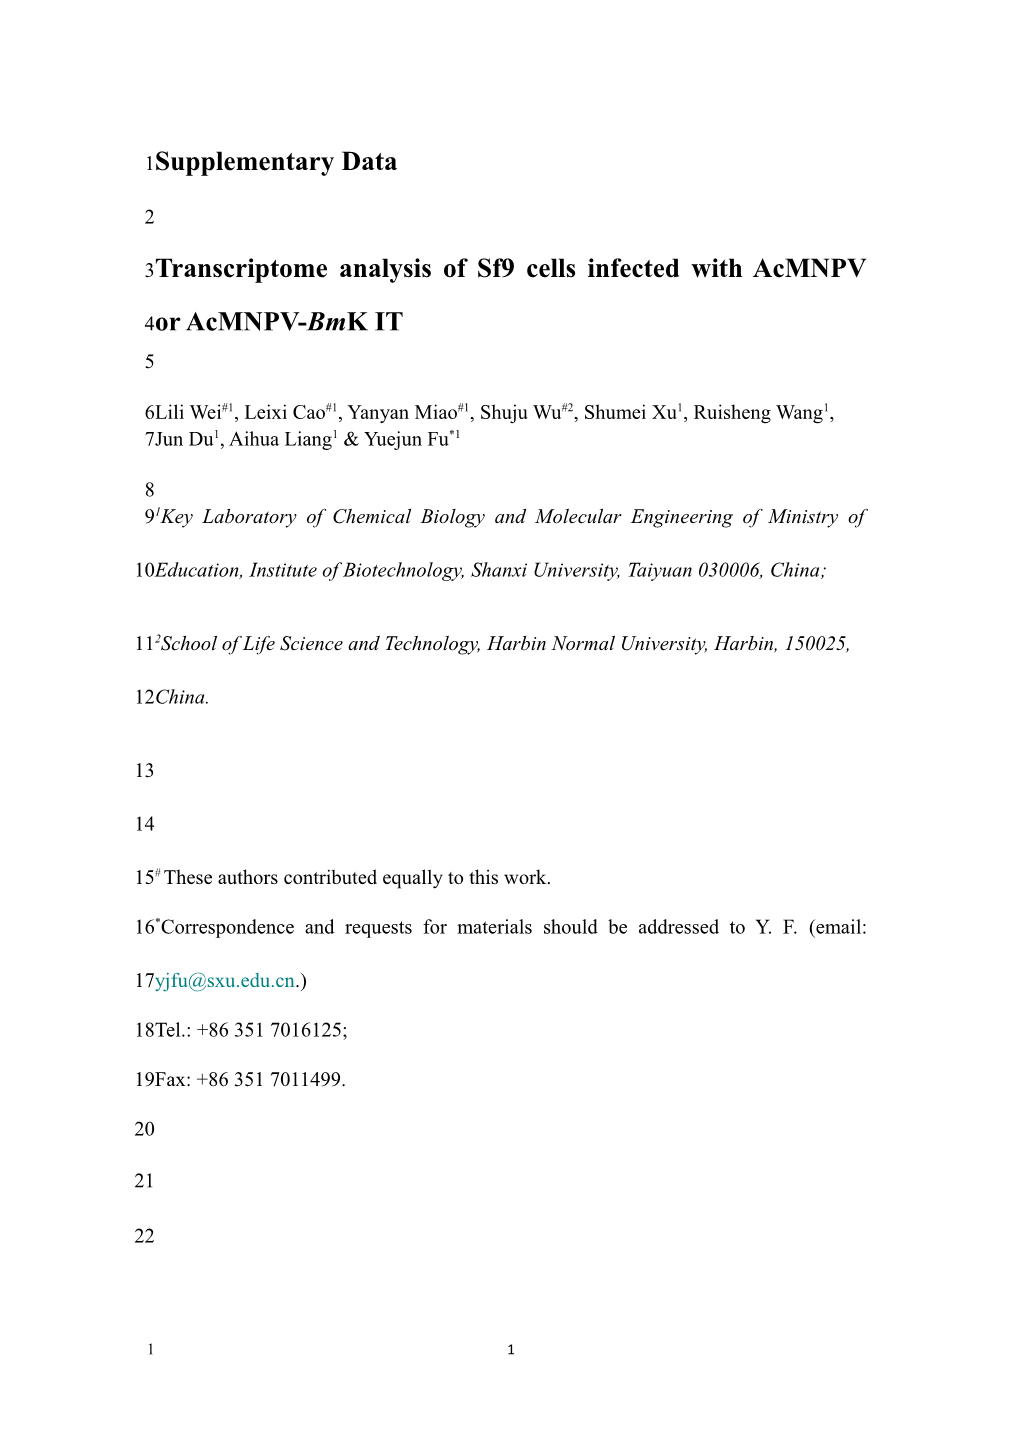 Transcriptome Analysis of Sf9 Cells Infected with Acmnpv and Acmnpv-Bmk IT